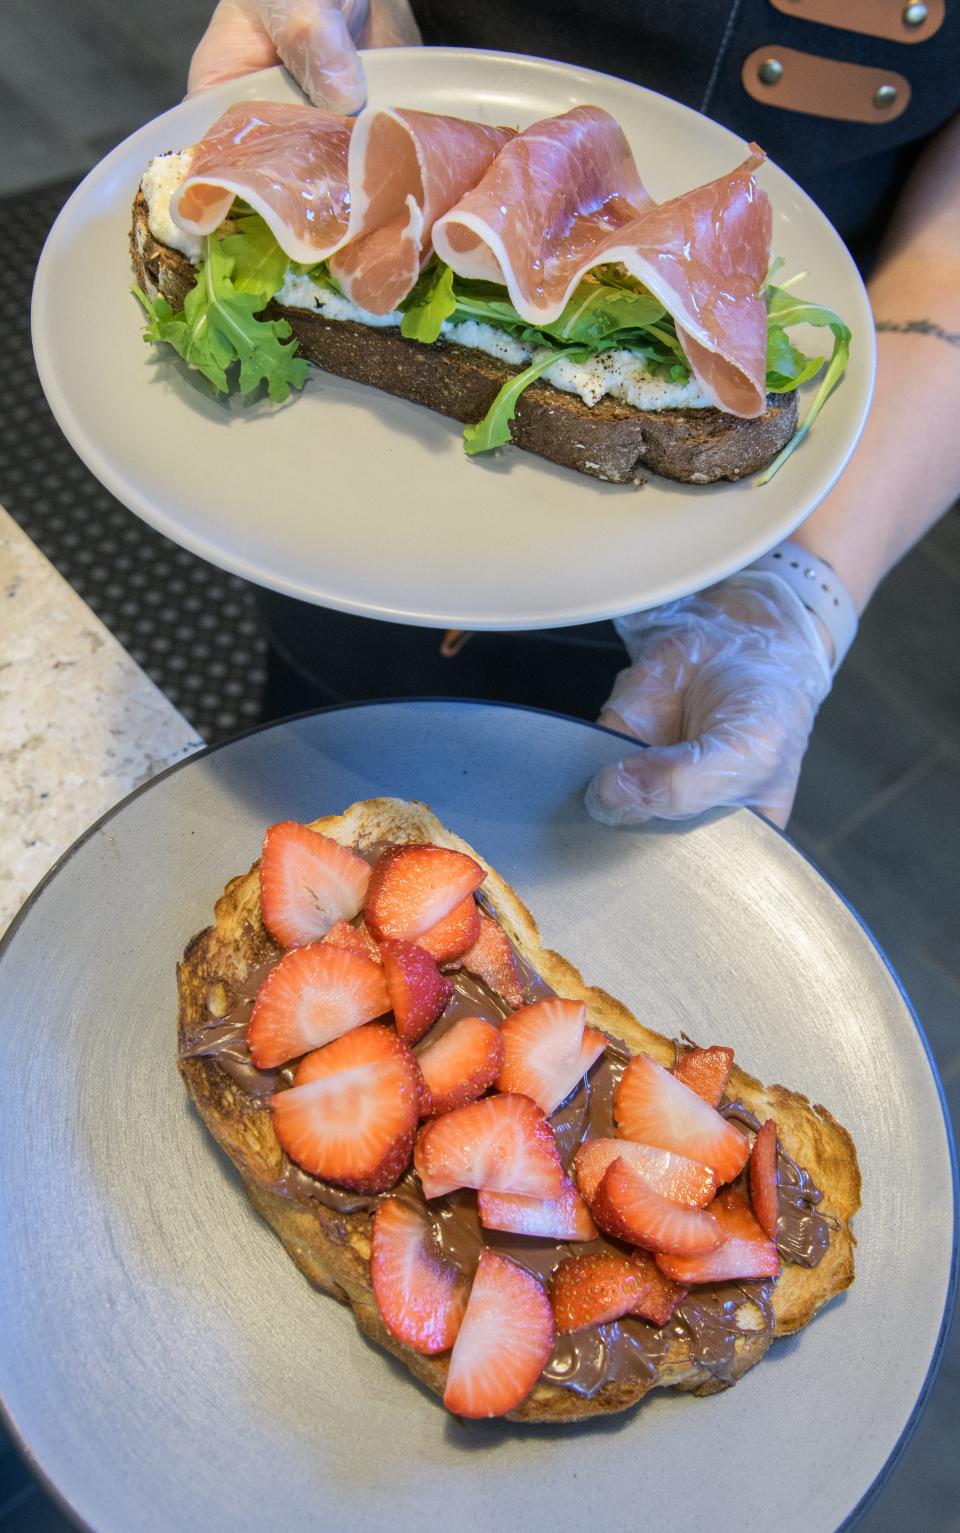 Nutella Toast with strawberries, bottom, and Ricotta Toast with prosciutto, arugula and honey is served up at the new Intuition Coffee + Juice in the Kickapoo Building in downtown Peoria.